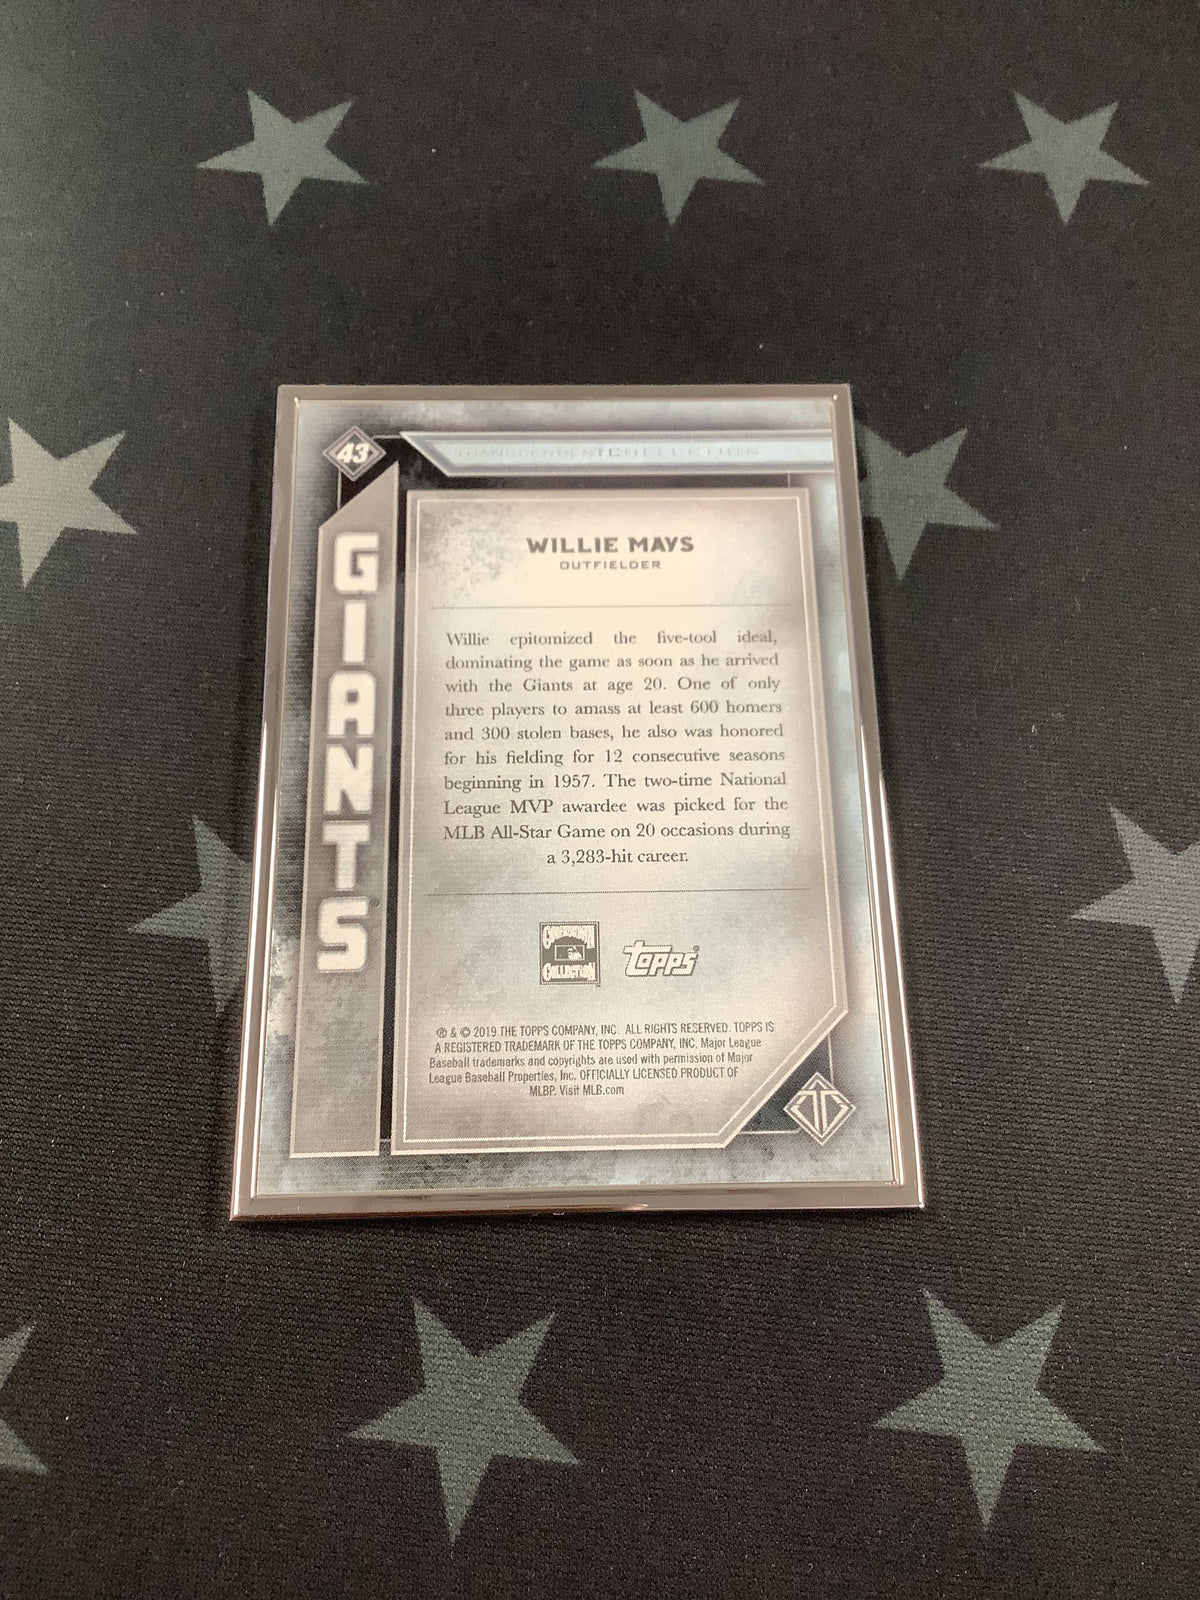 2019 WILLIE MAYS TRANSCENDENT COLLECTION BASEBALL #76/100